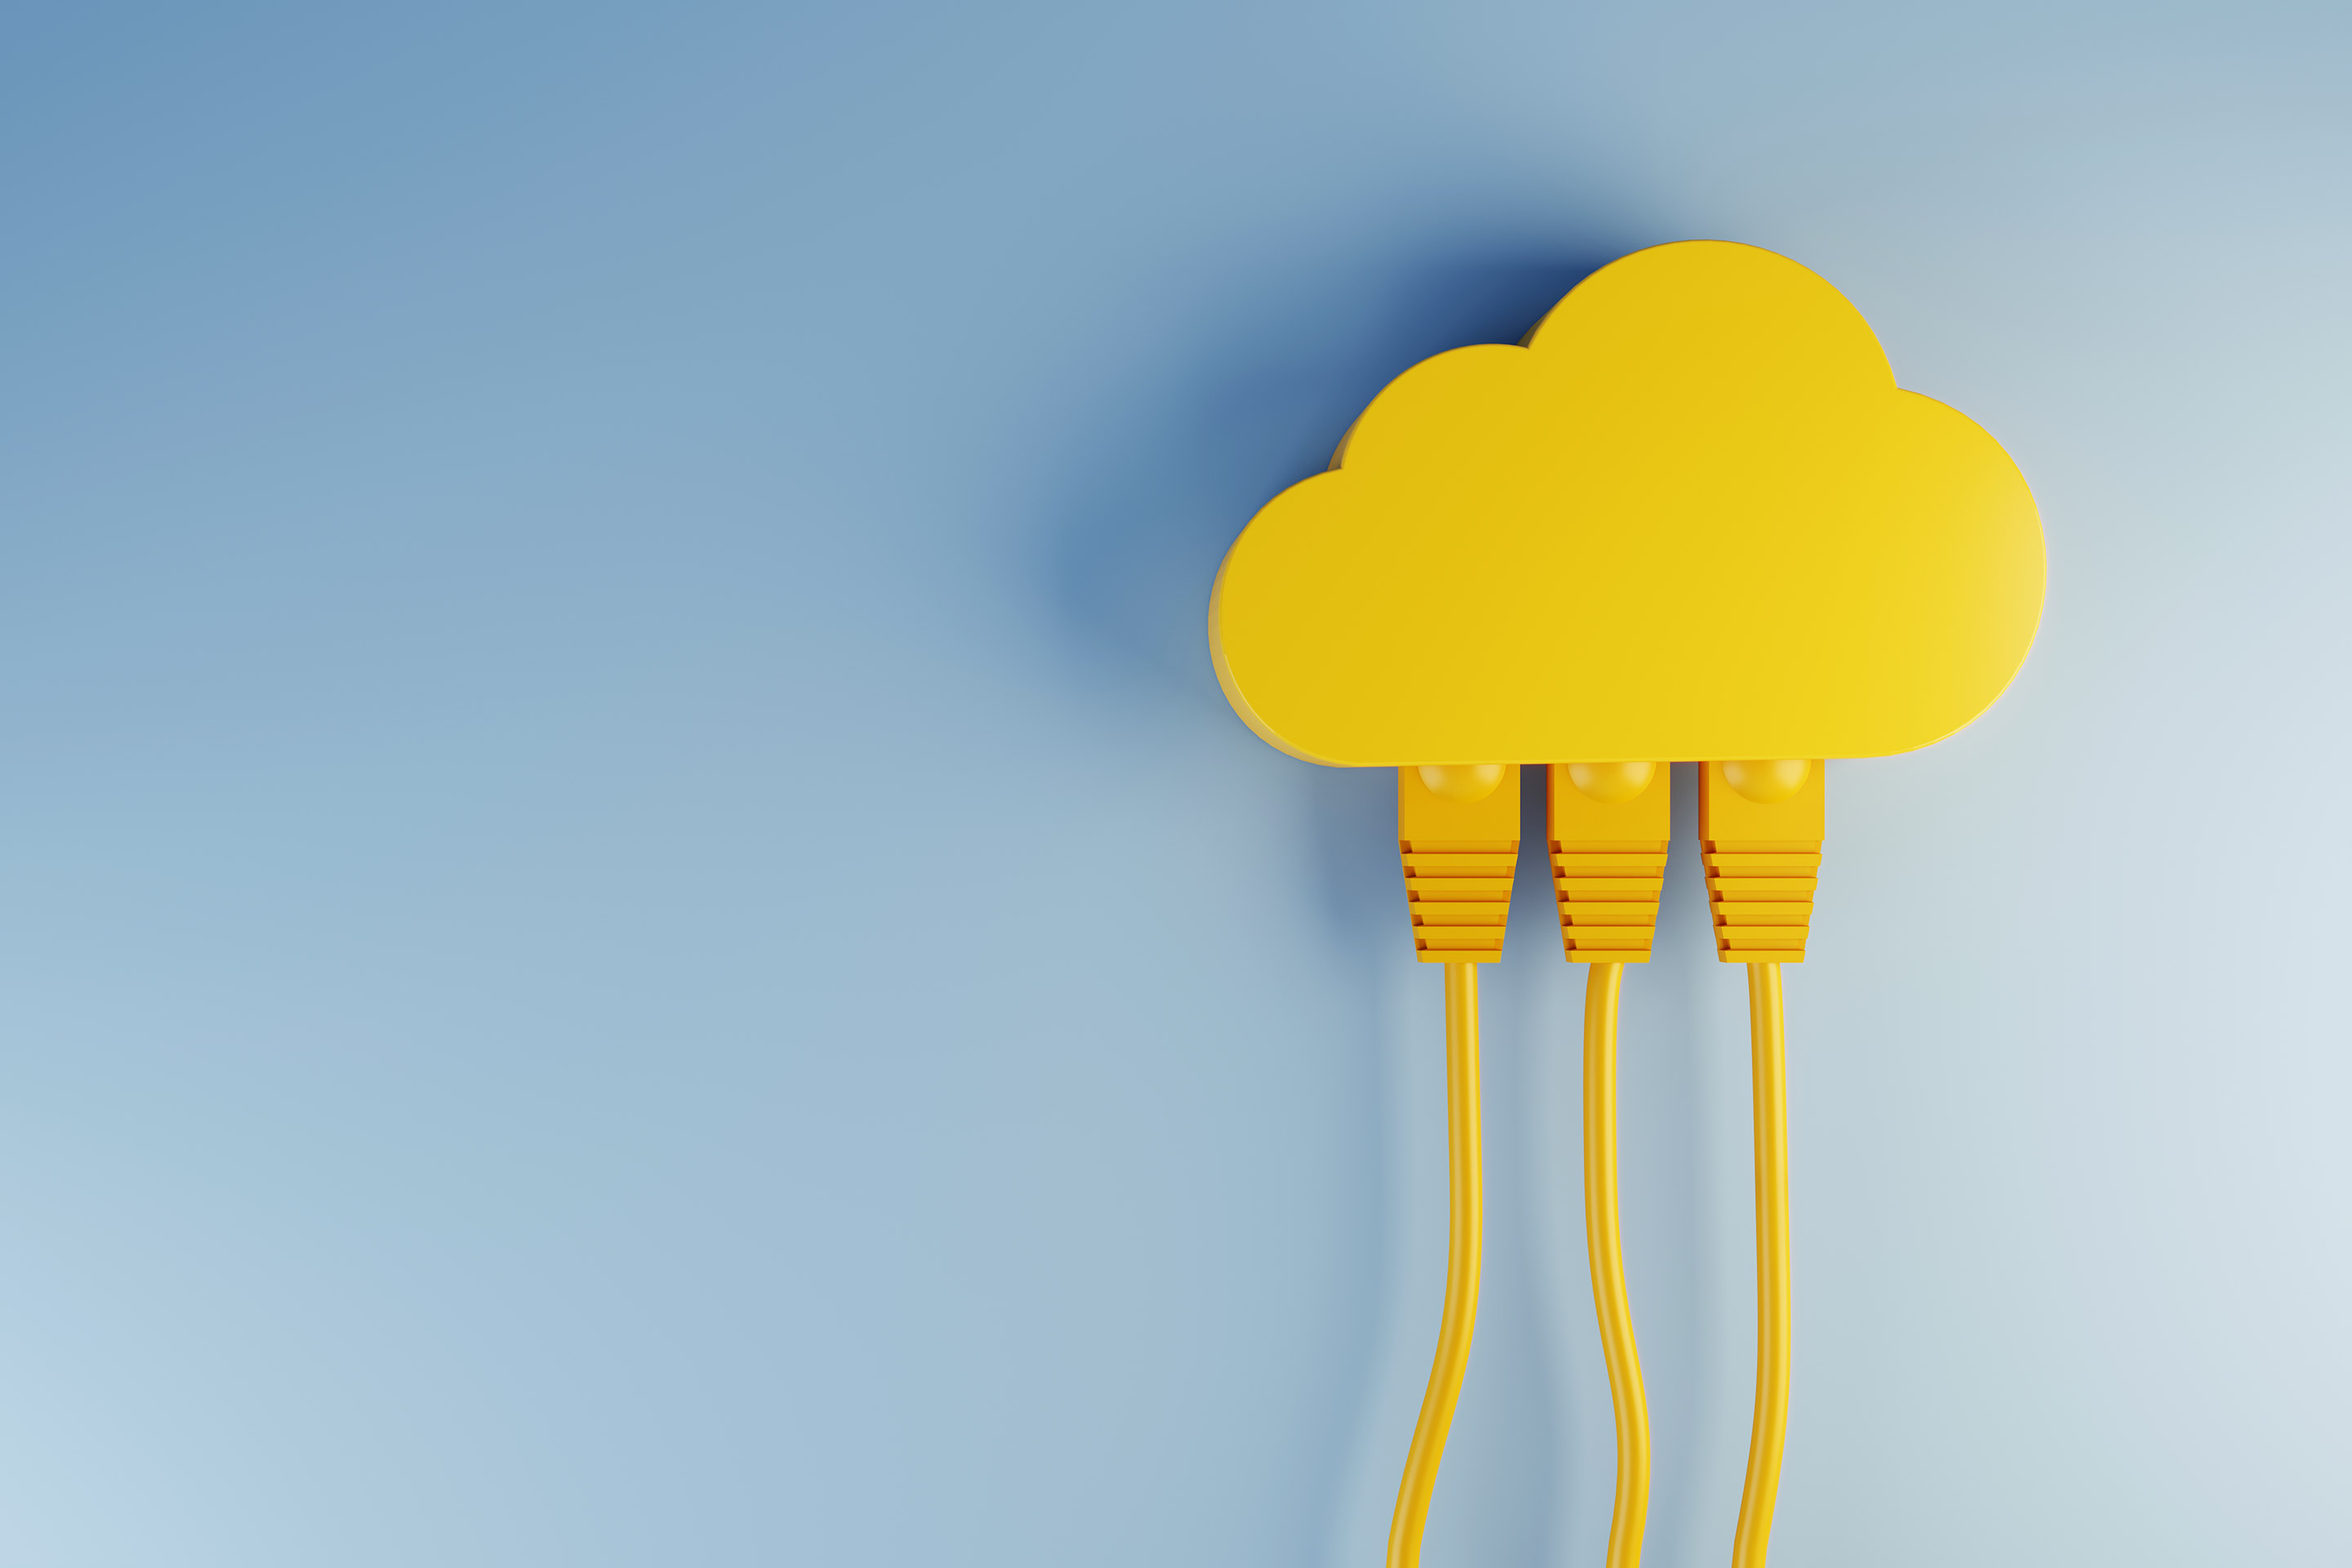 Floating against a soft blue background, three bright yellow power cords descend from a whimsical, cloud-shaped, yellow outlet hub, which they are plugged into.